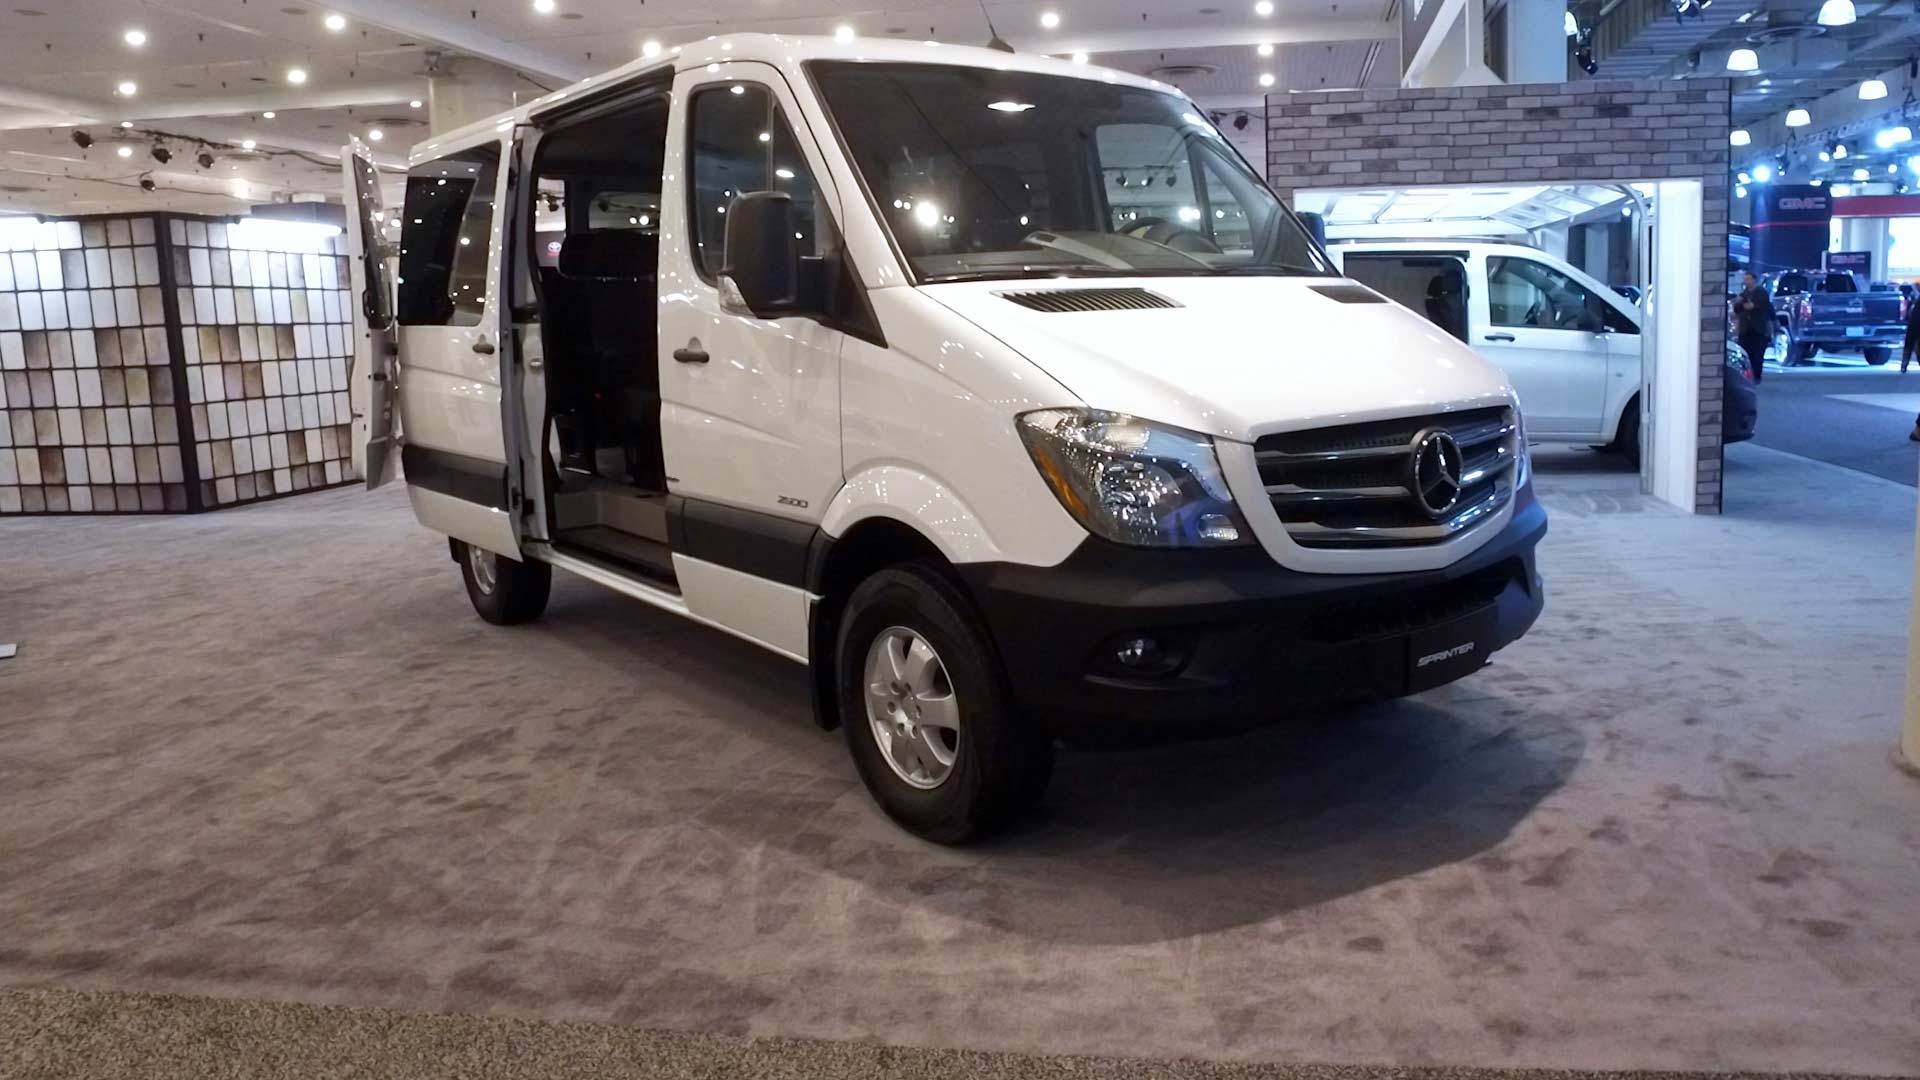 Proud to own online marketplace of commercial Mercedes-Benz sprinter